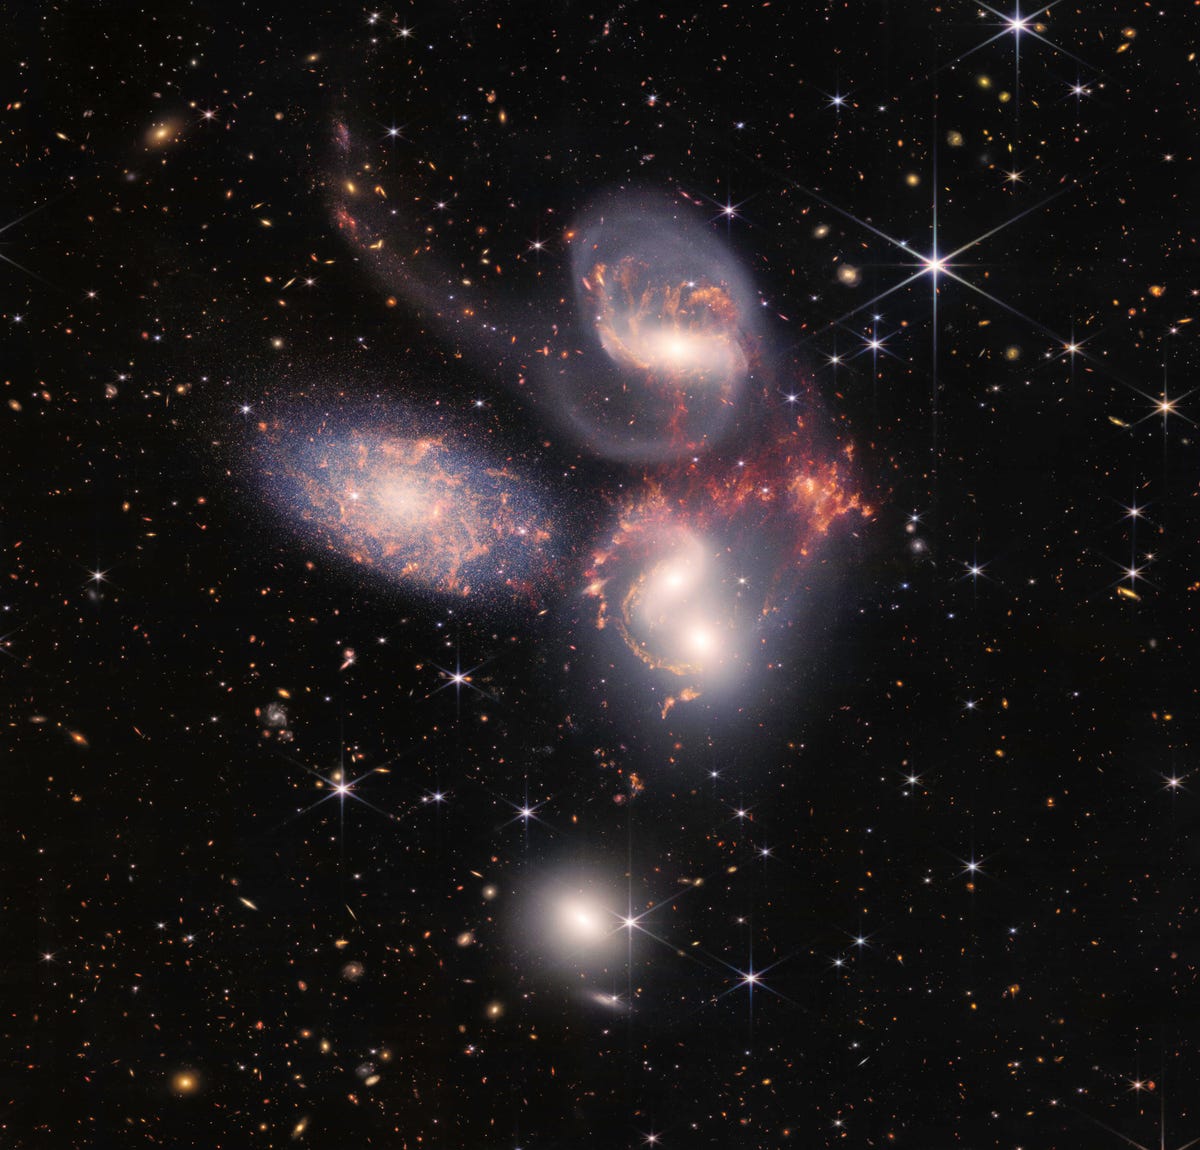 Webb view of five galaxies looking like swirling objects of light against a color-flecked backdrop of space.